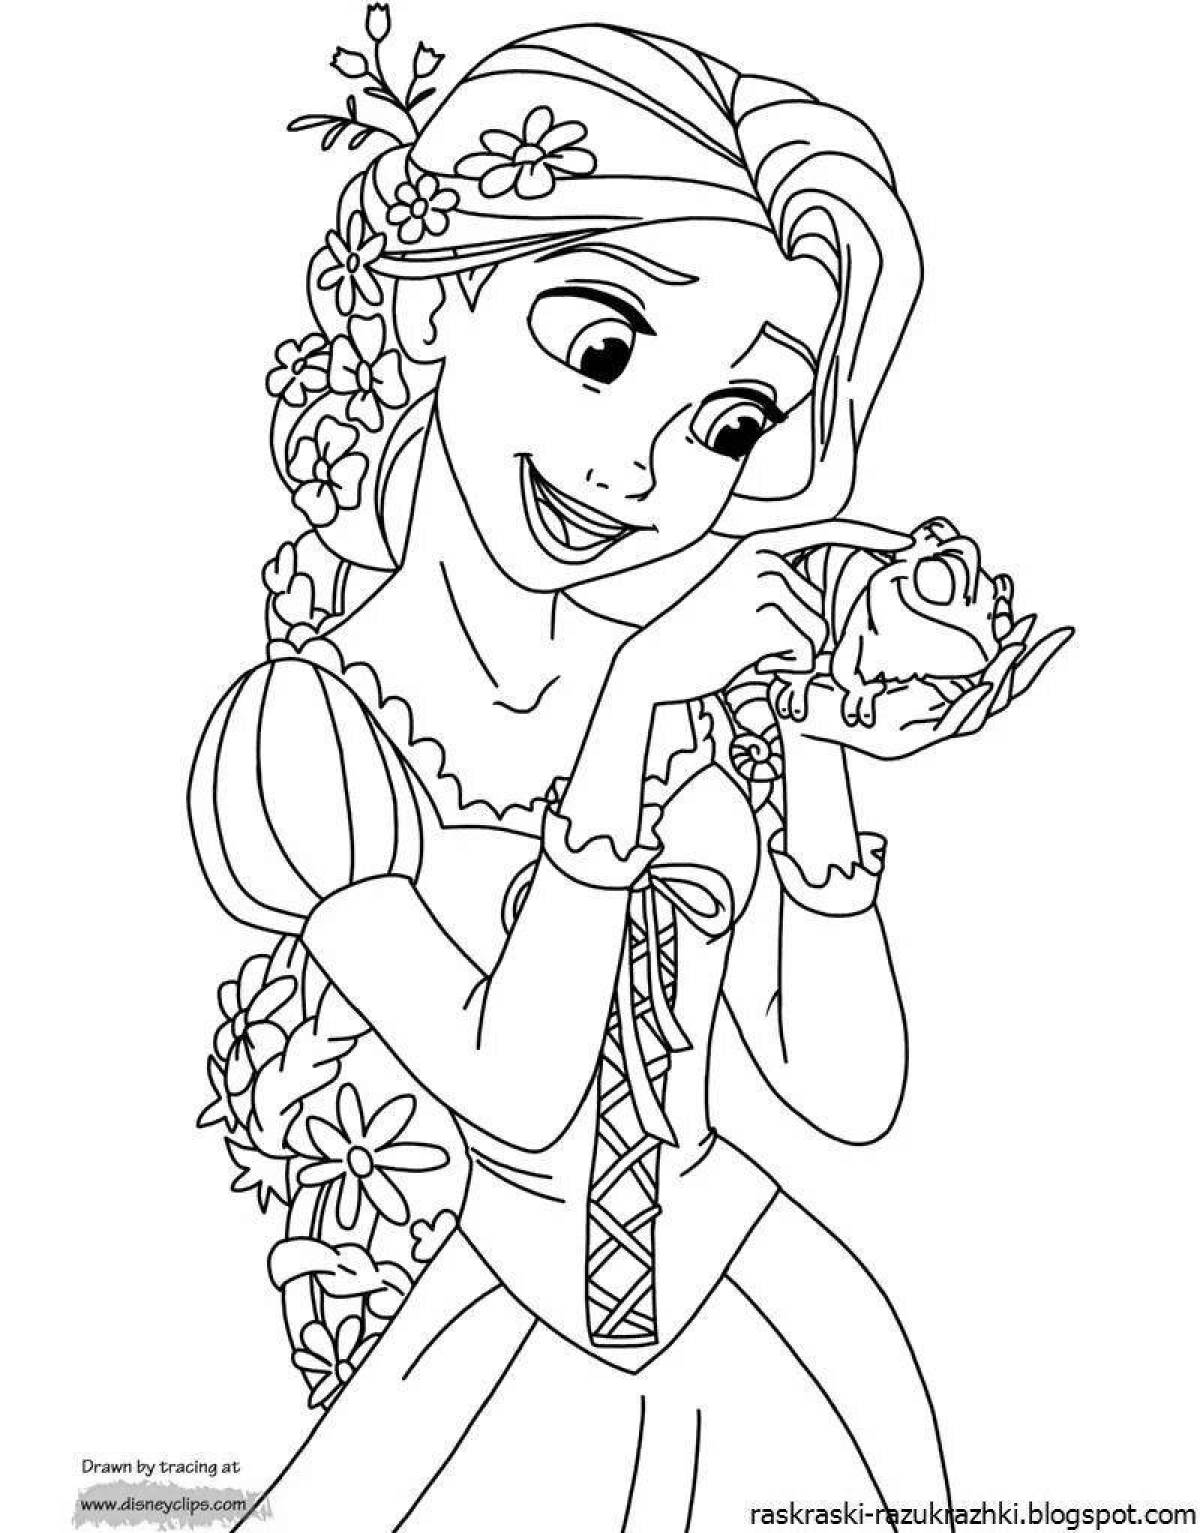 Adorable girls coloring pages for 6-7 year olds